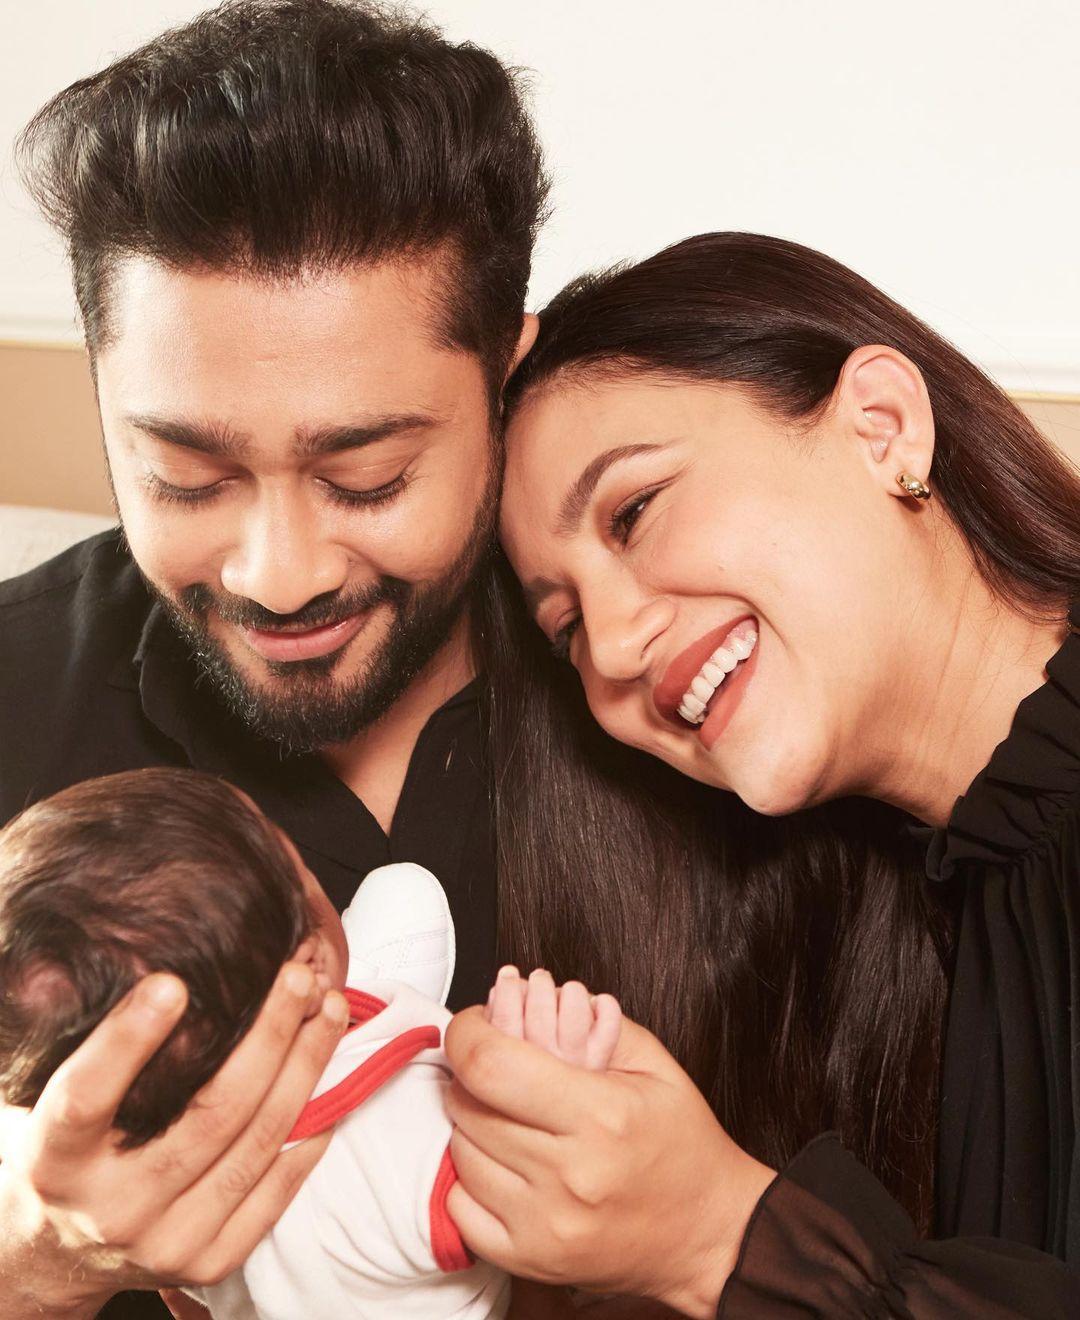 Gauahar Khan and Zaid Darbar
Gauahar and Zaid who welcomed their first child, a baby boy, on May 10 are enjoying their parenthood at its fullest. The two who have named their little one Zehaan, keep posting interesting videos and photos on their social media